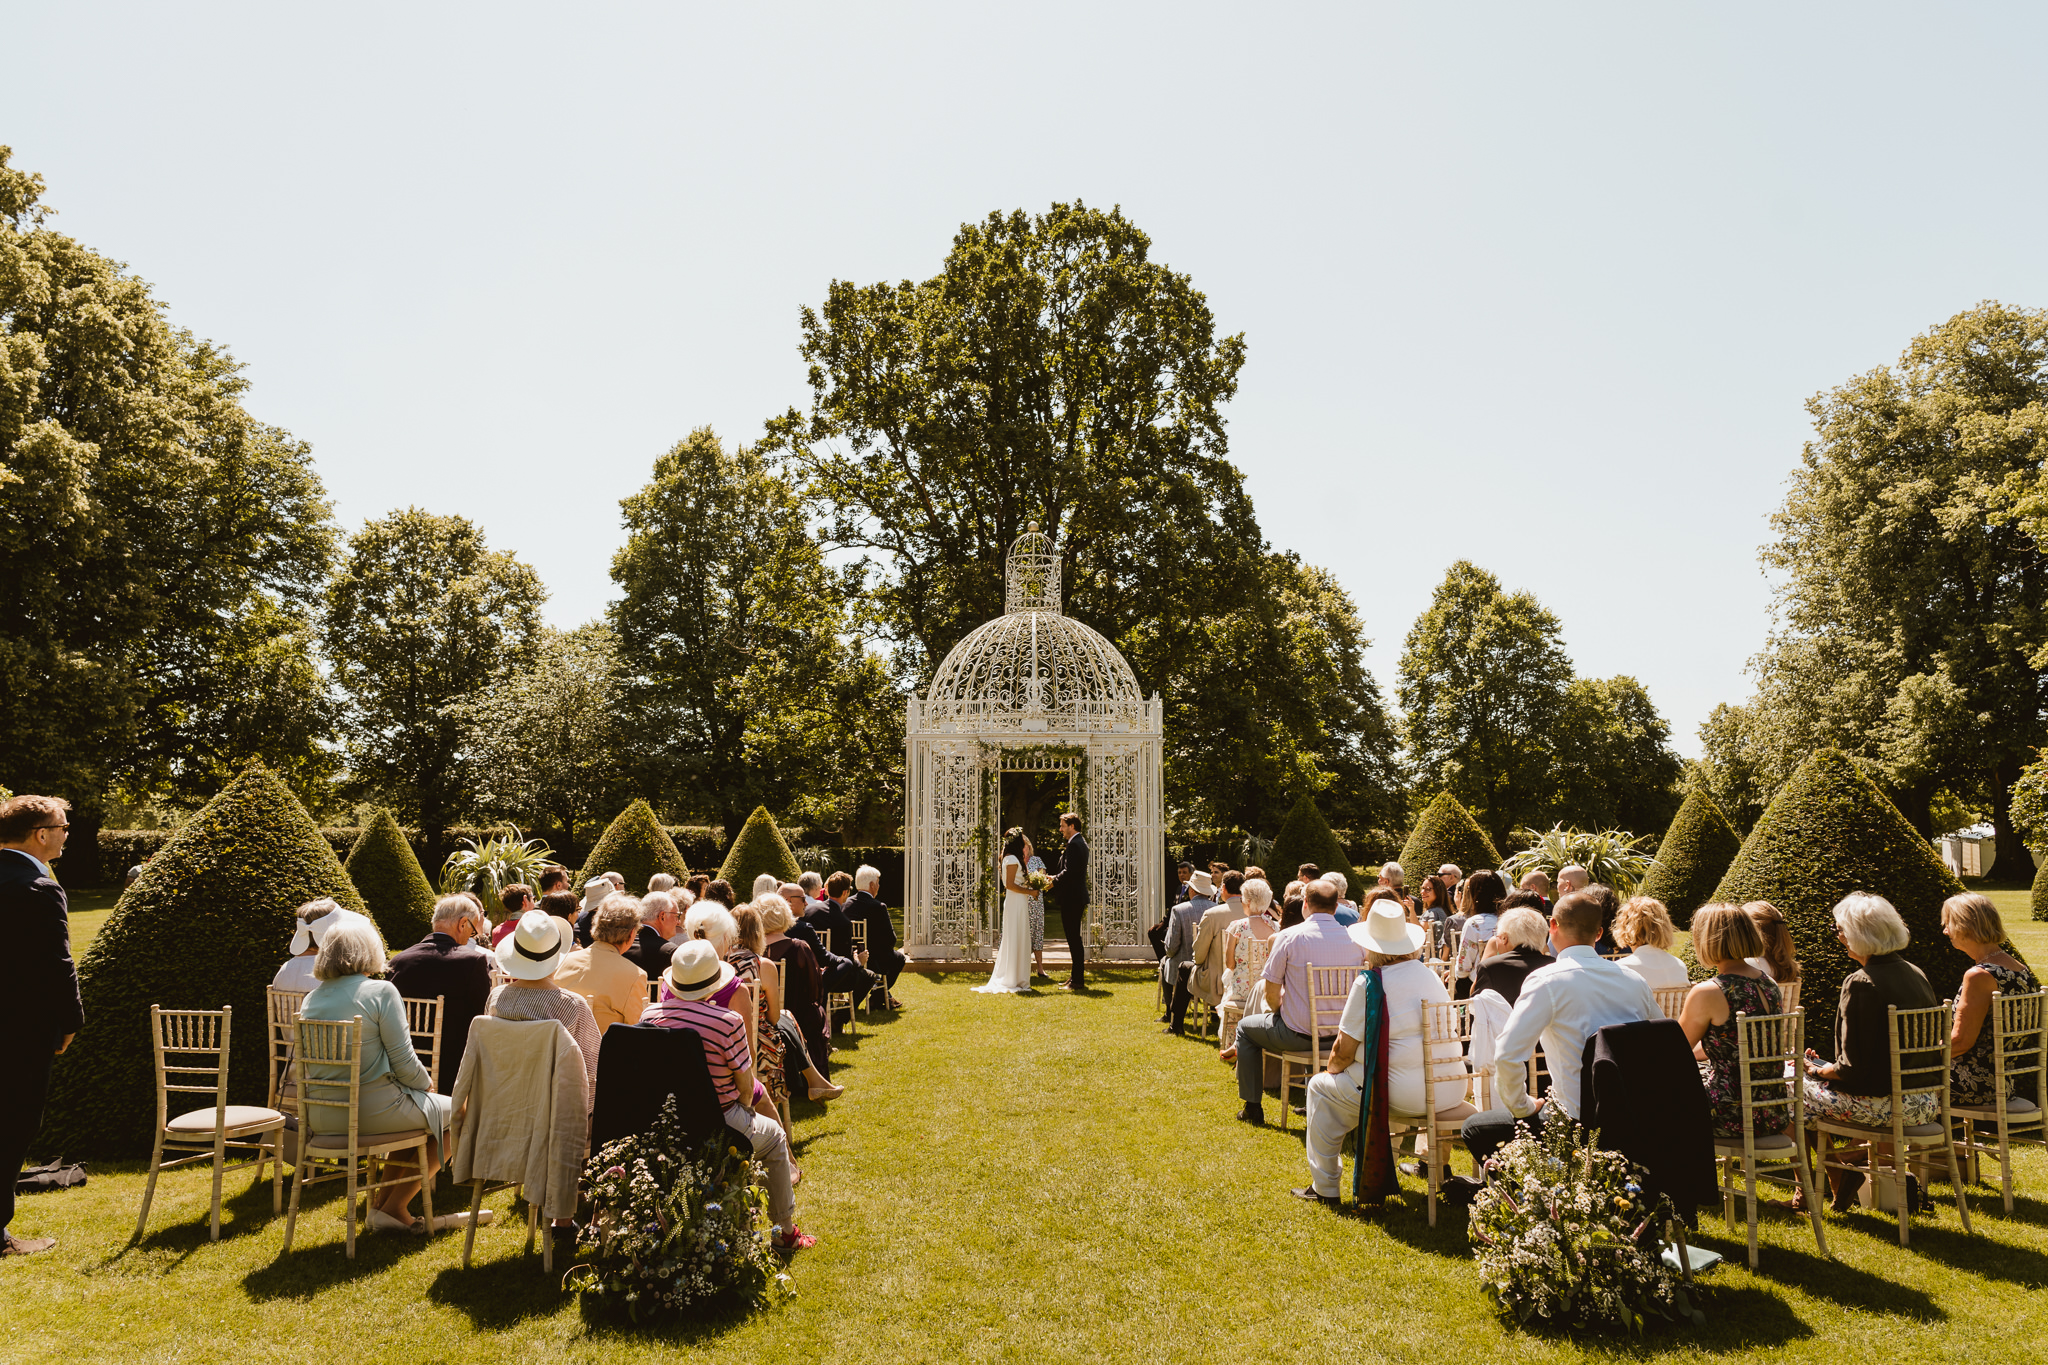 The beautiful setting for the ceremony - Chenies Manor House, Buckinghamshire